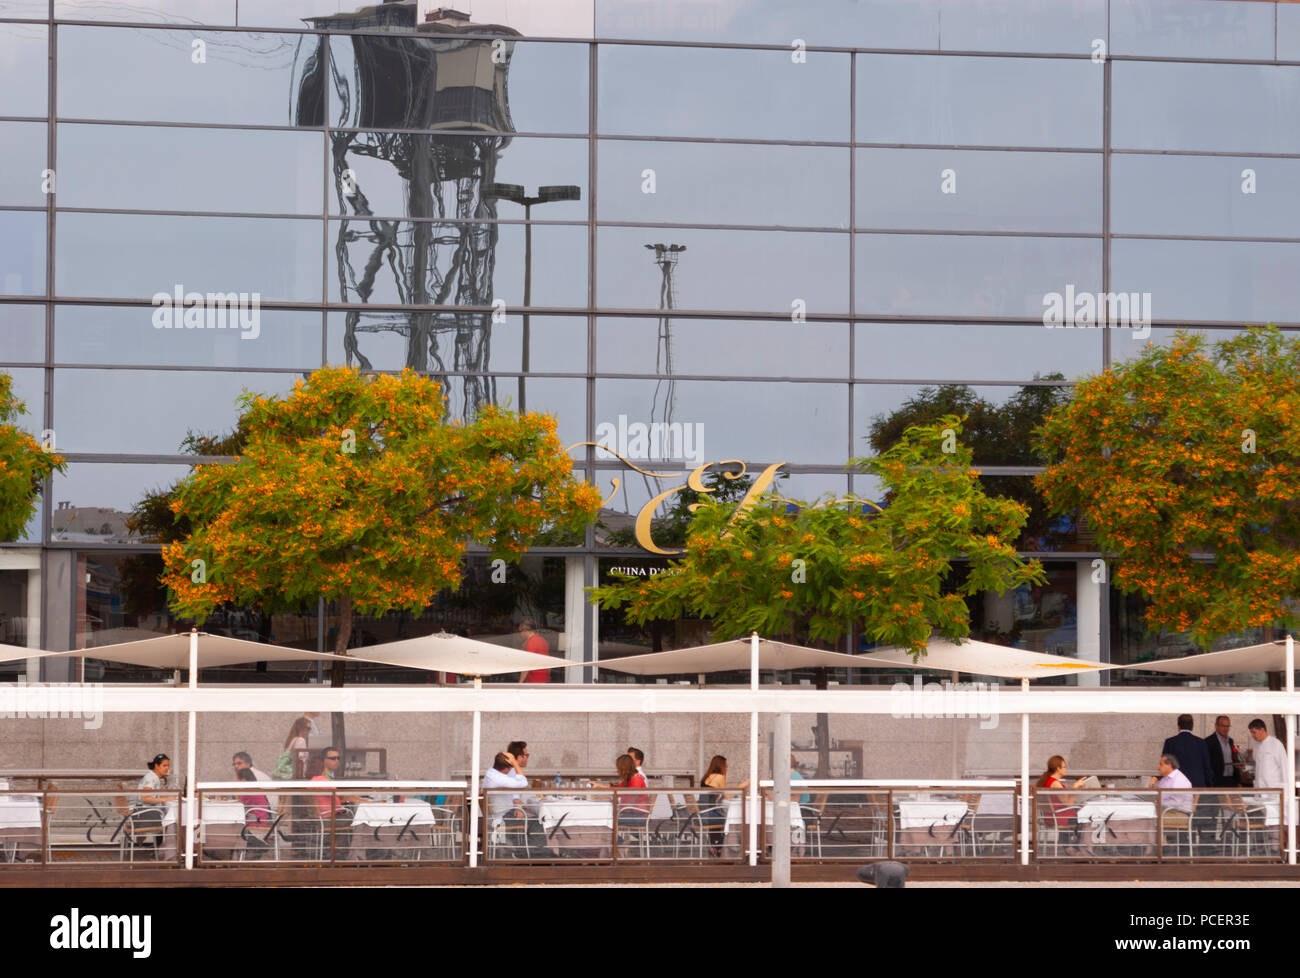 Barcelona Spain Harbour Port Vell People Eating Outside with Reflections Showing the Cable Car Station Stock Photo